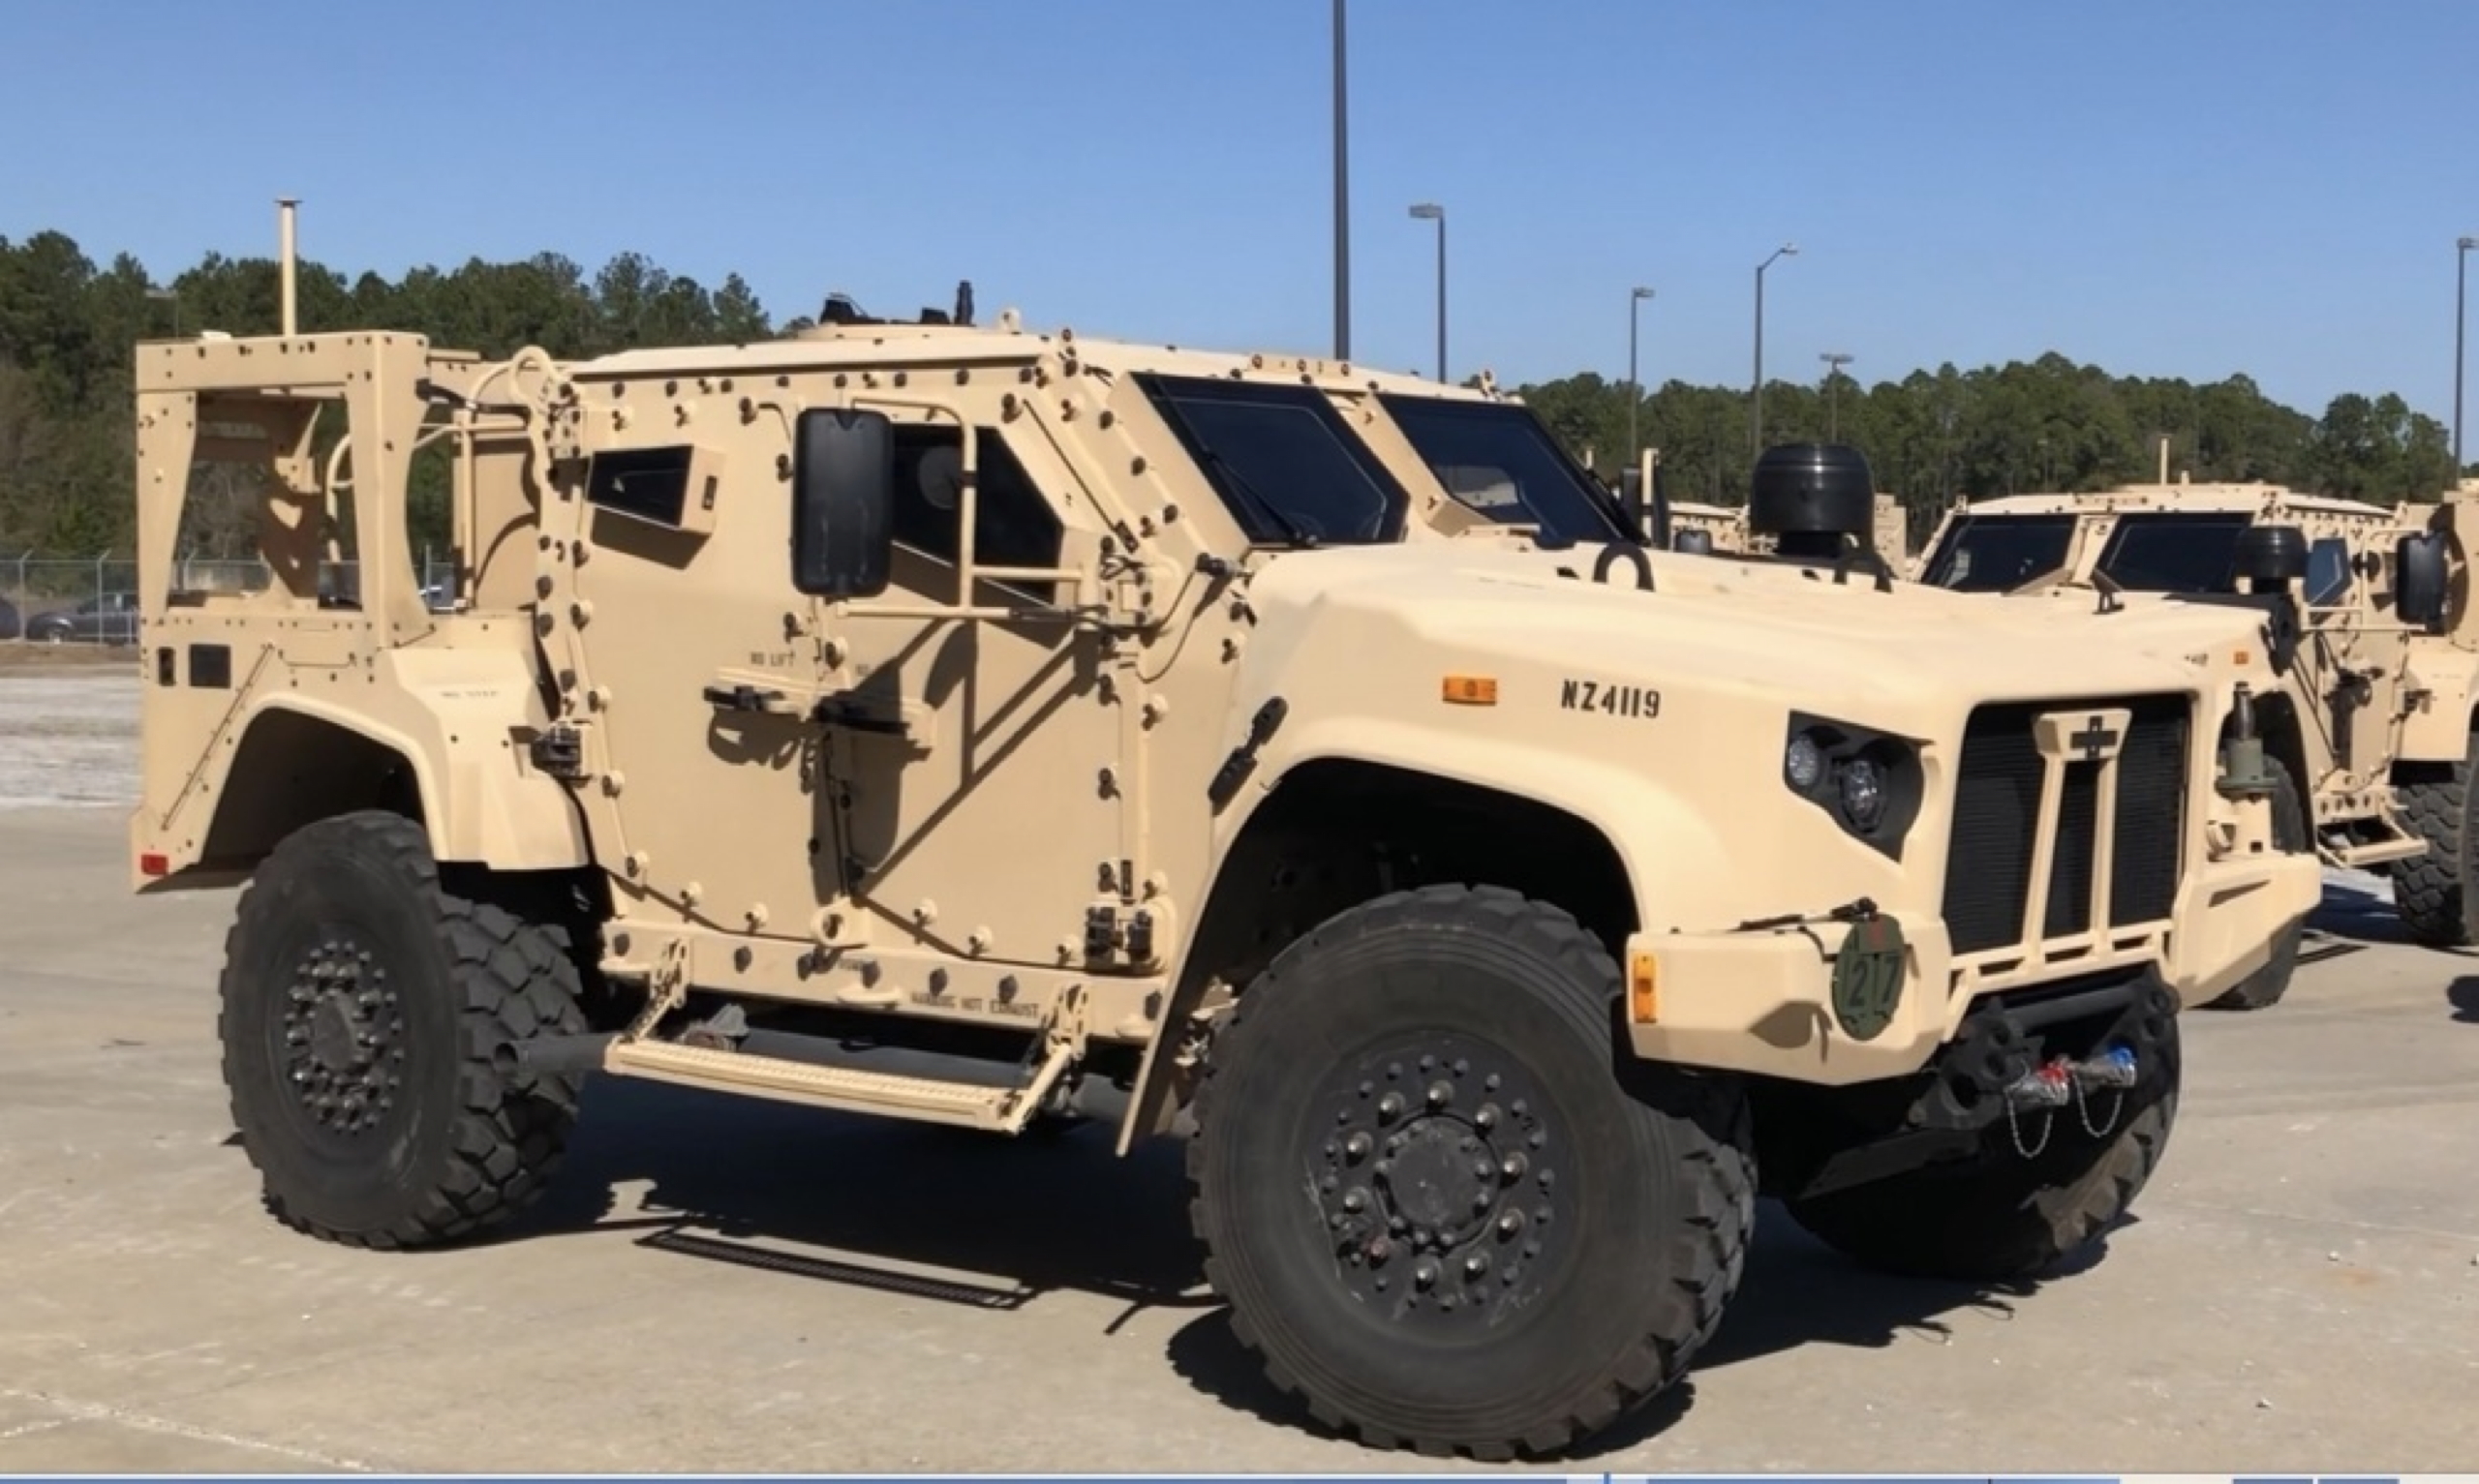 military ground vehicles like this JLTV are demanding applications that require rugged, high-performance connectors